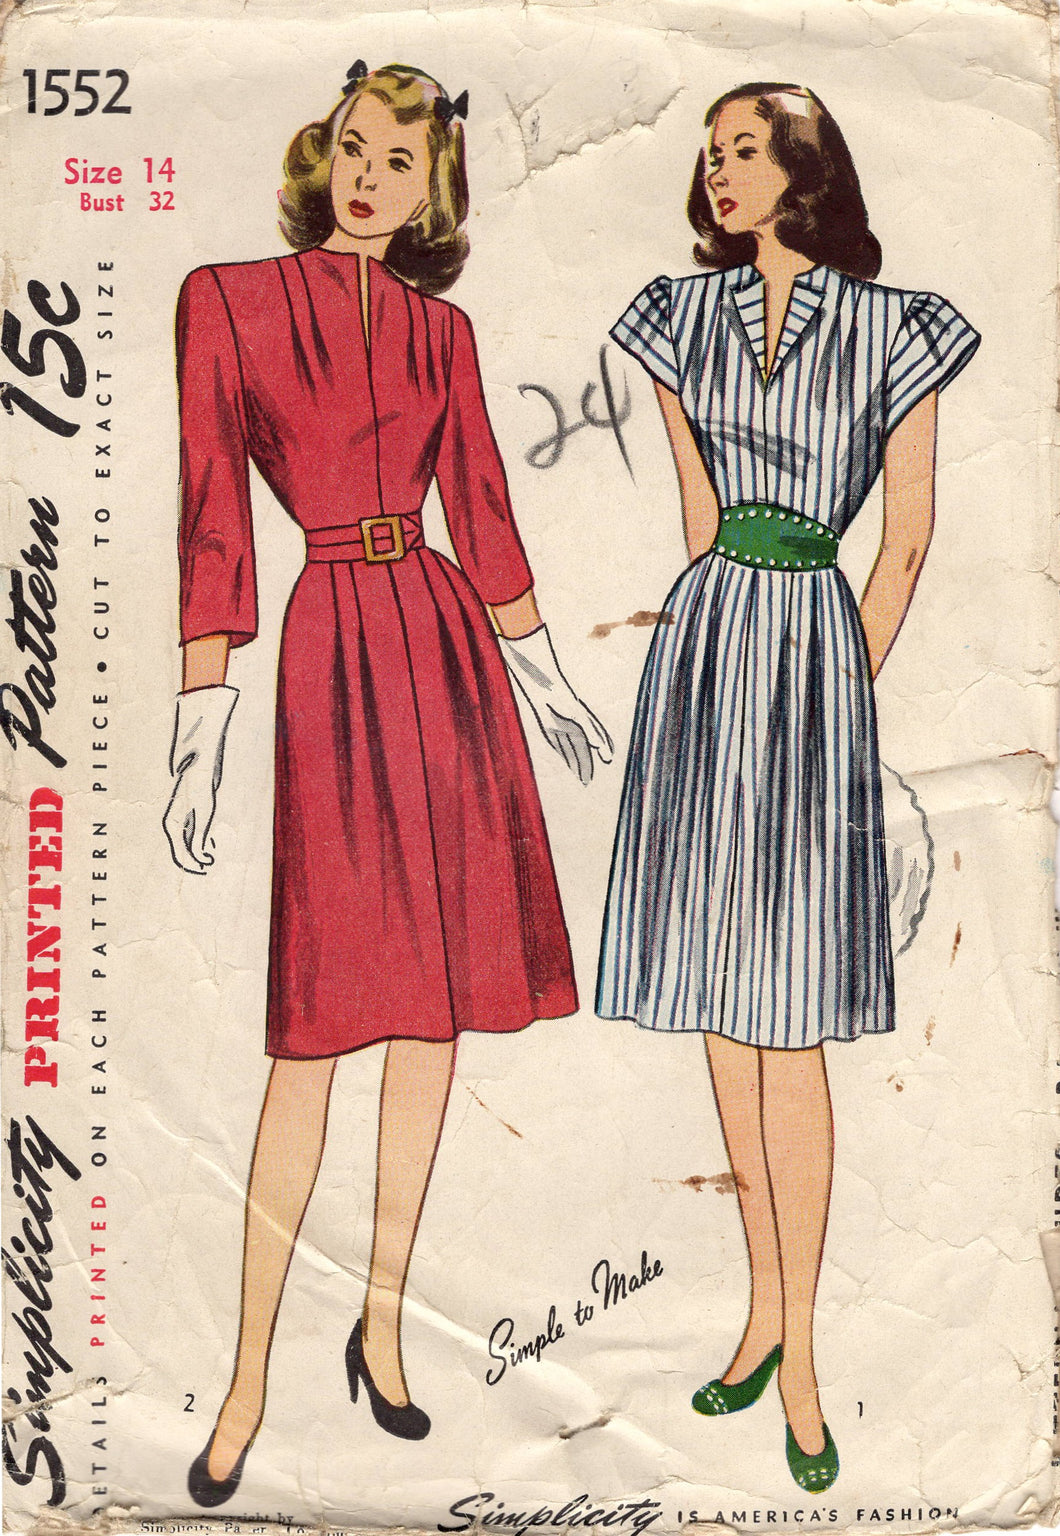 1940's Simplicity One Piece Dress with Tucks at Shoulders and waist - Bust 32